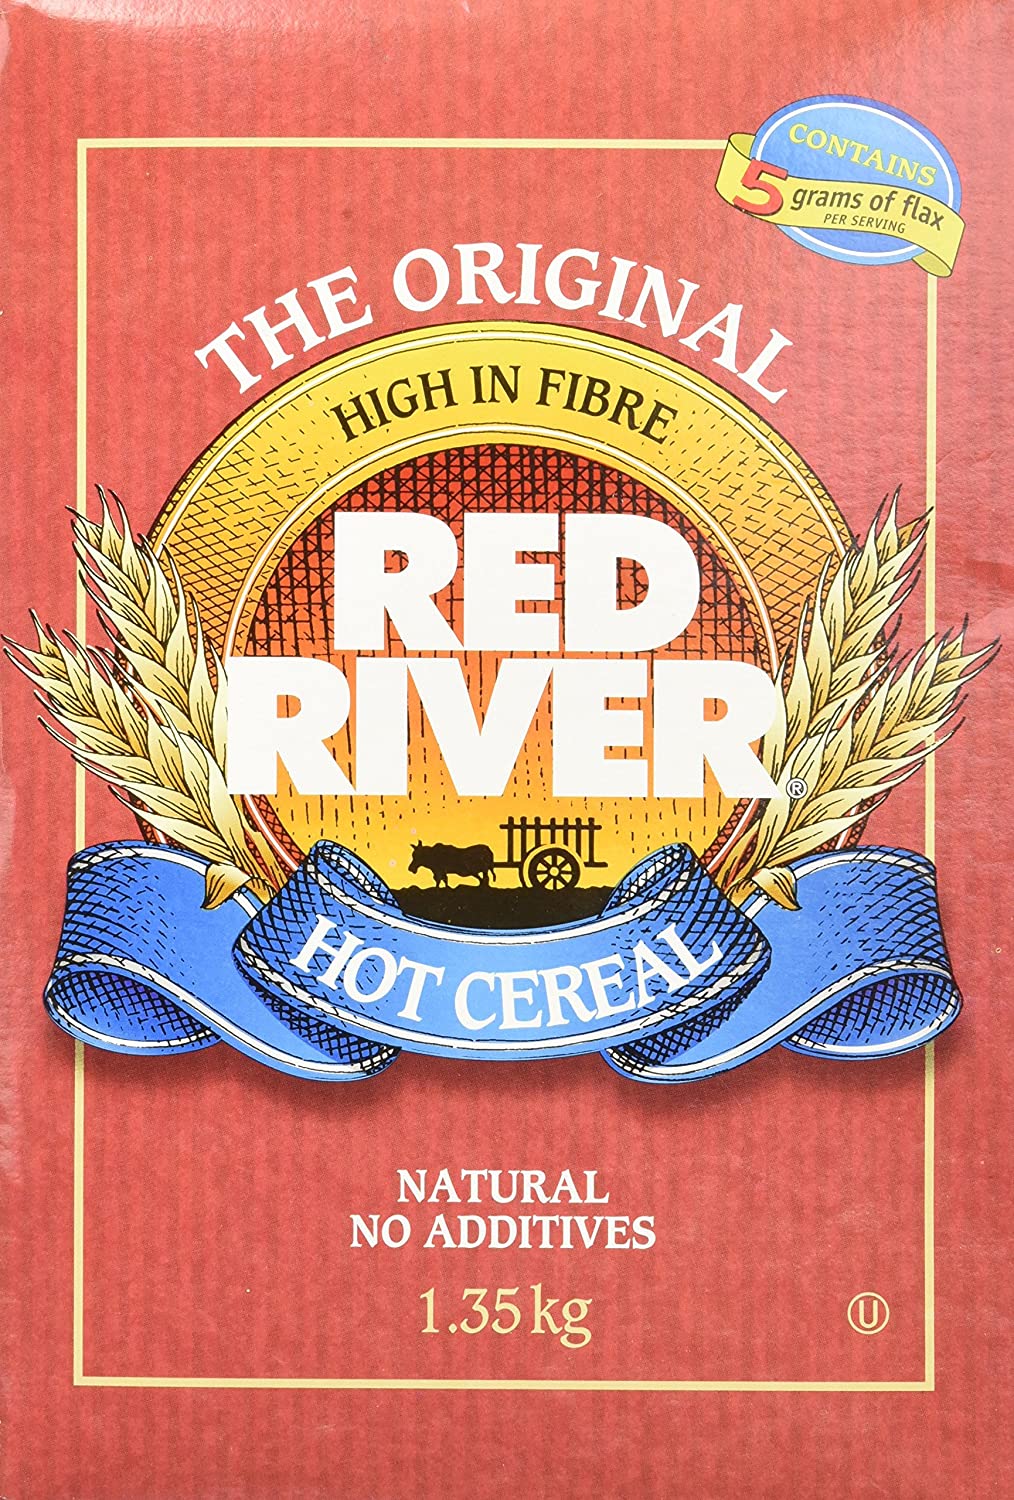 Red River Hot Cereal